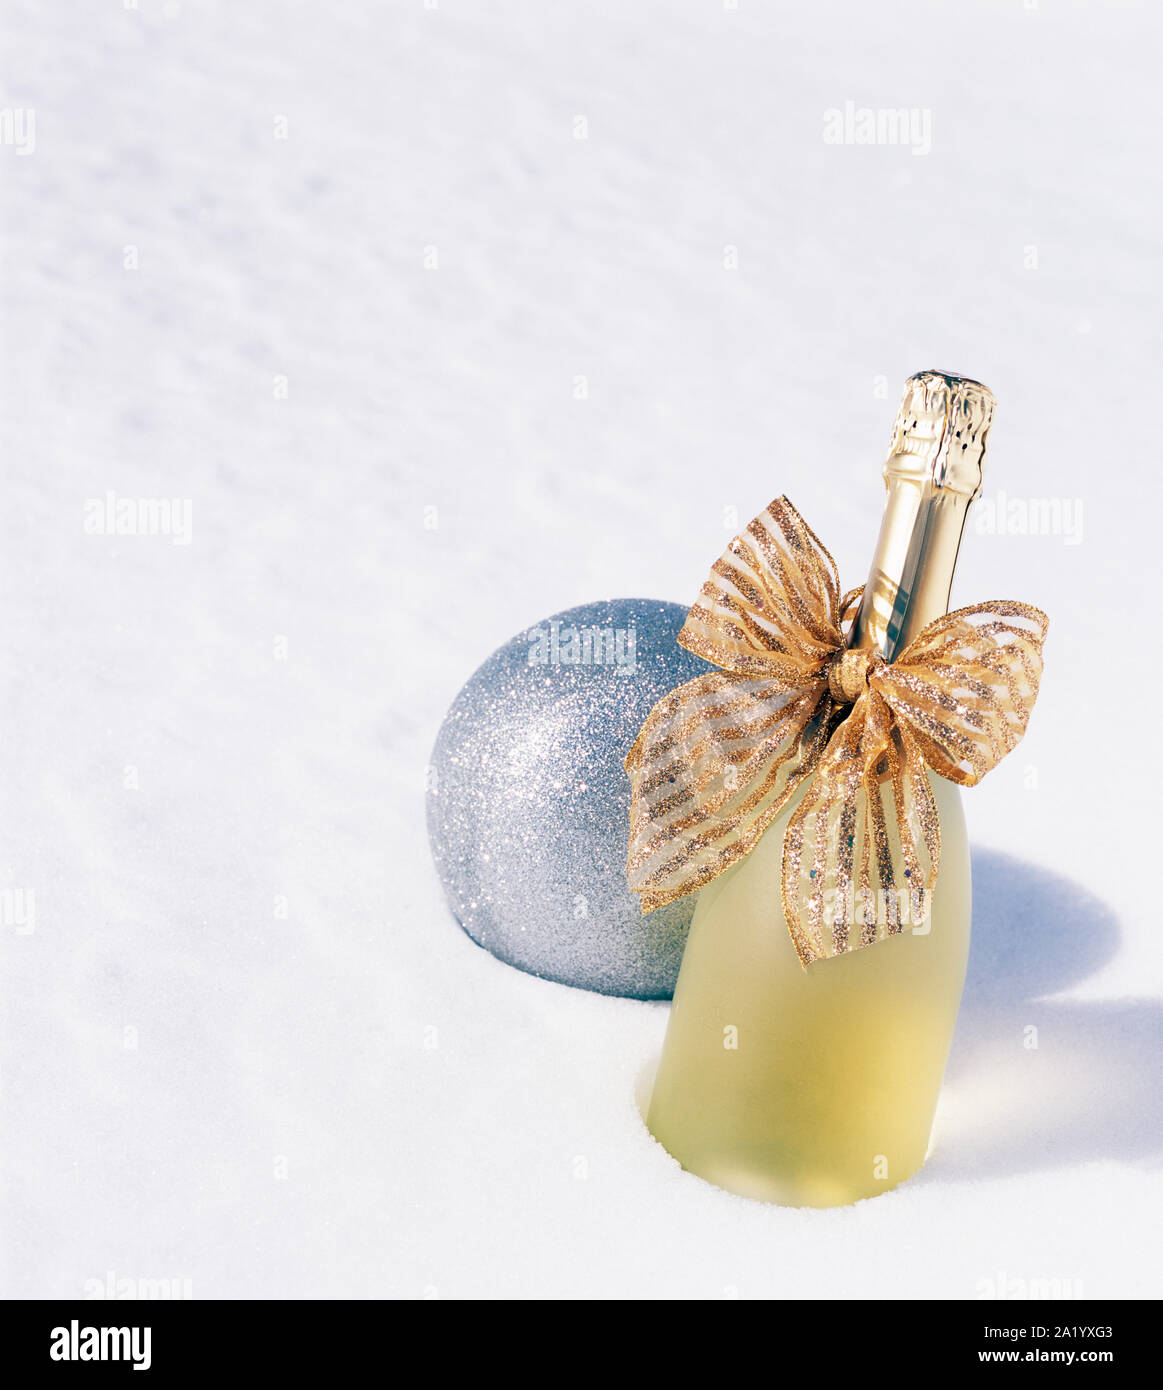 Bottle of Champagne sparkling wine with gold ribbon bow and glitter ornament on white snow background. Festive Christmas and New Year's Eve drinks. Stock Photo